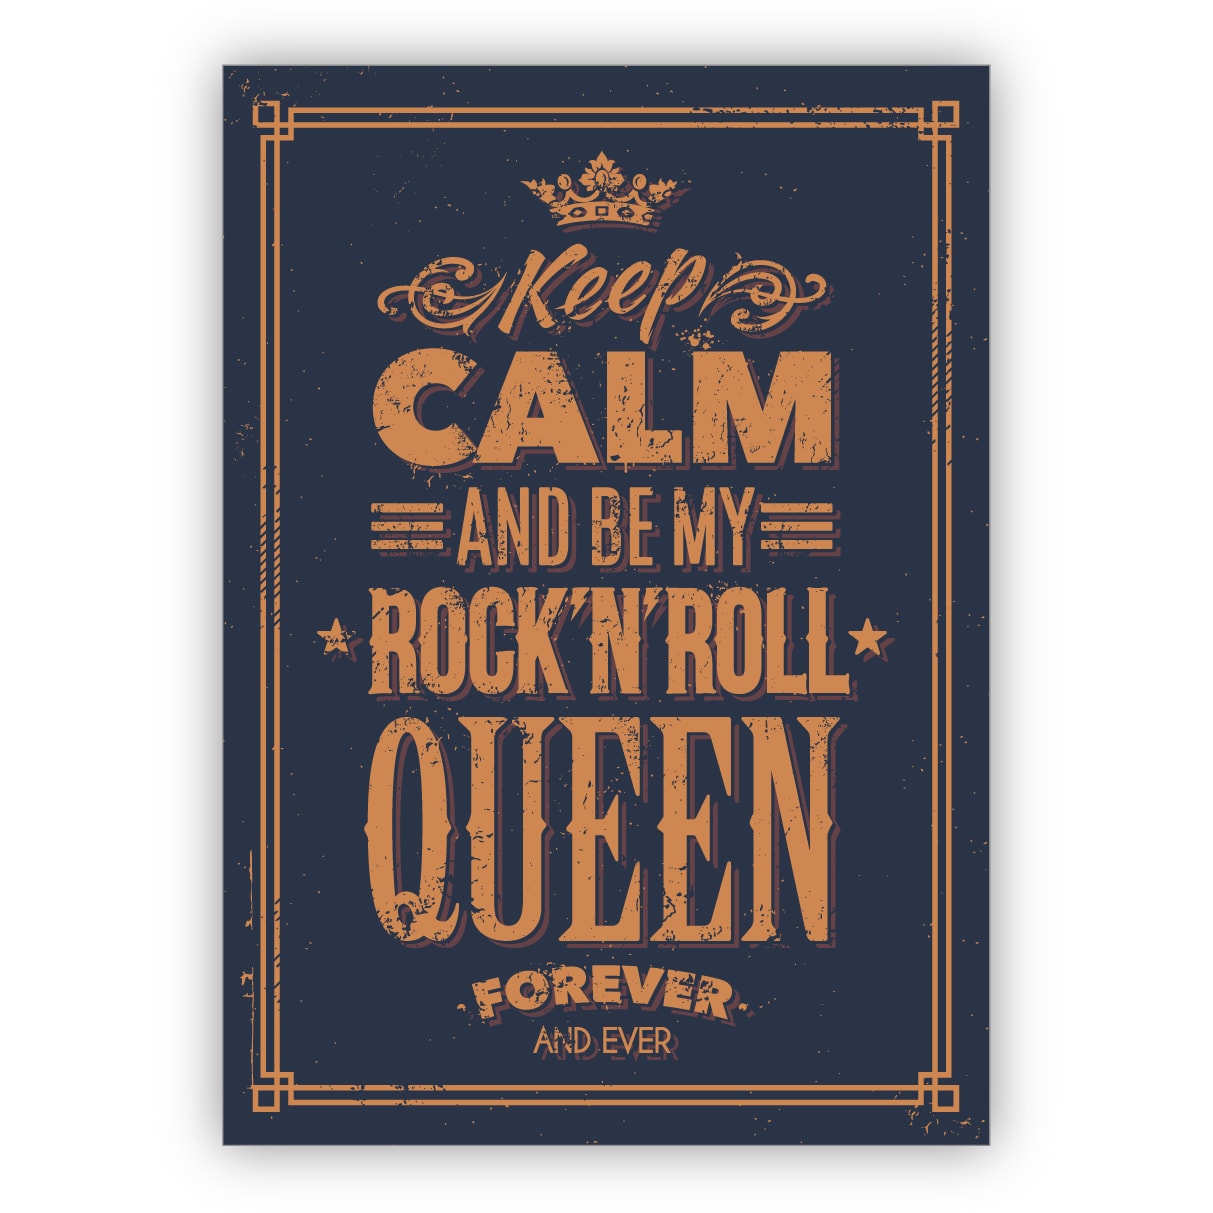 Schicke romantische Retro Motto Karte: Keep calm and be my Rock'n Roll queen for ever and ever